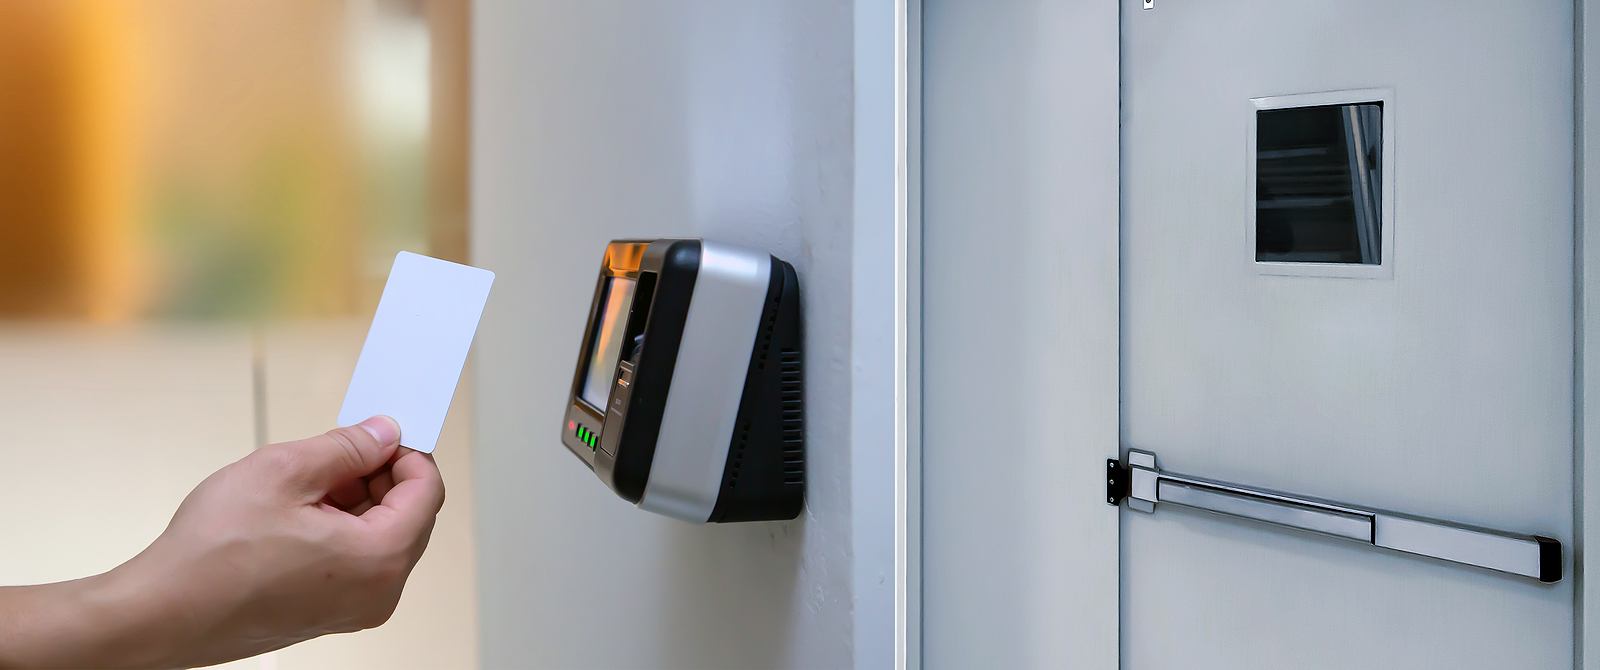 Benefits of Access Control Locks for Businesses